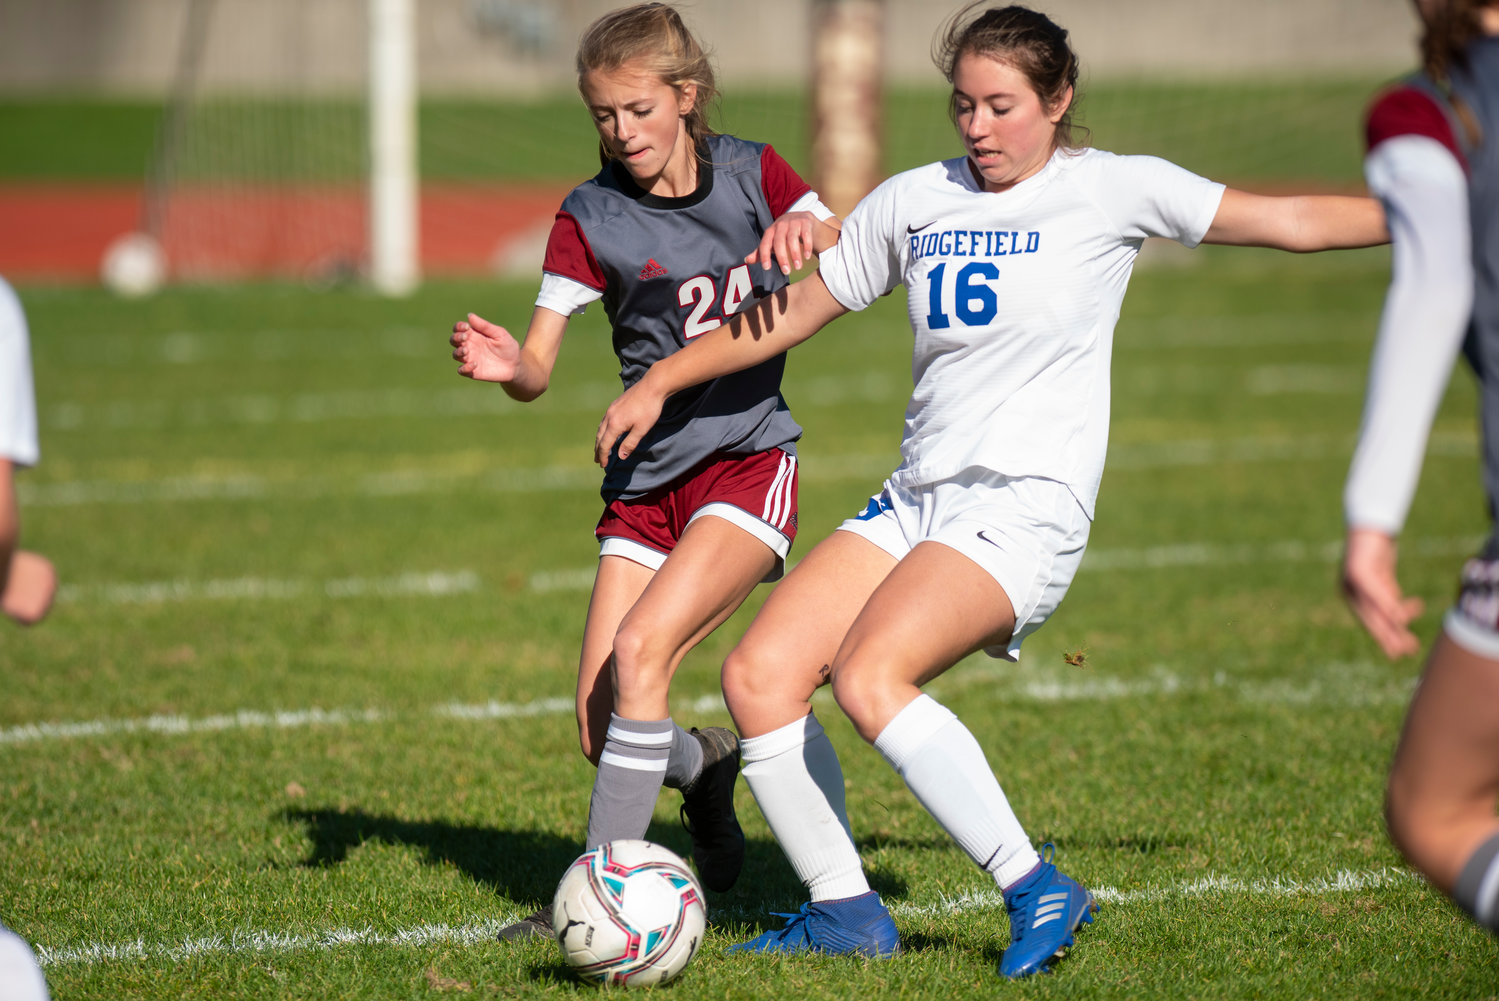 W.F. West defender Brielle Etter (24) battles for possession with Ridgefield's Kellie Krsul (16) during district play on Saturday in Chehalis.